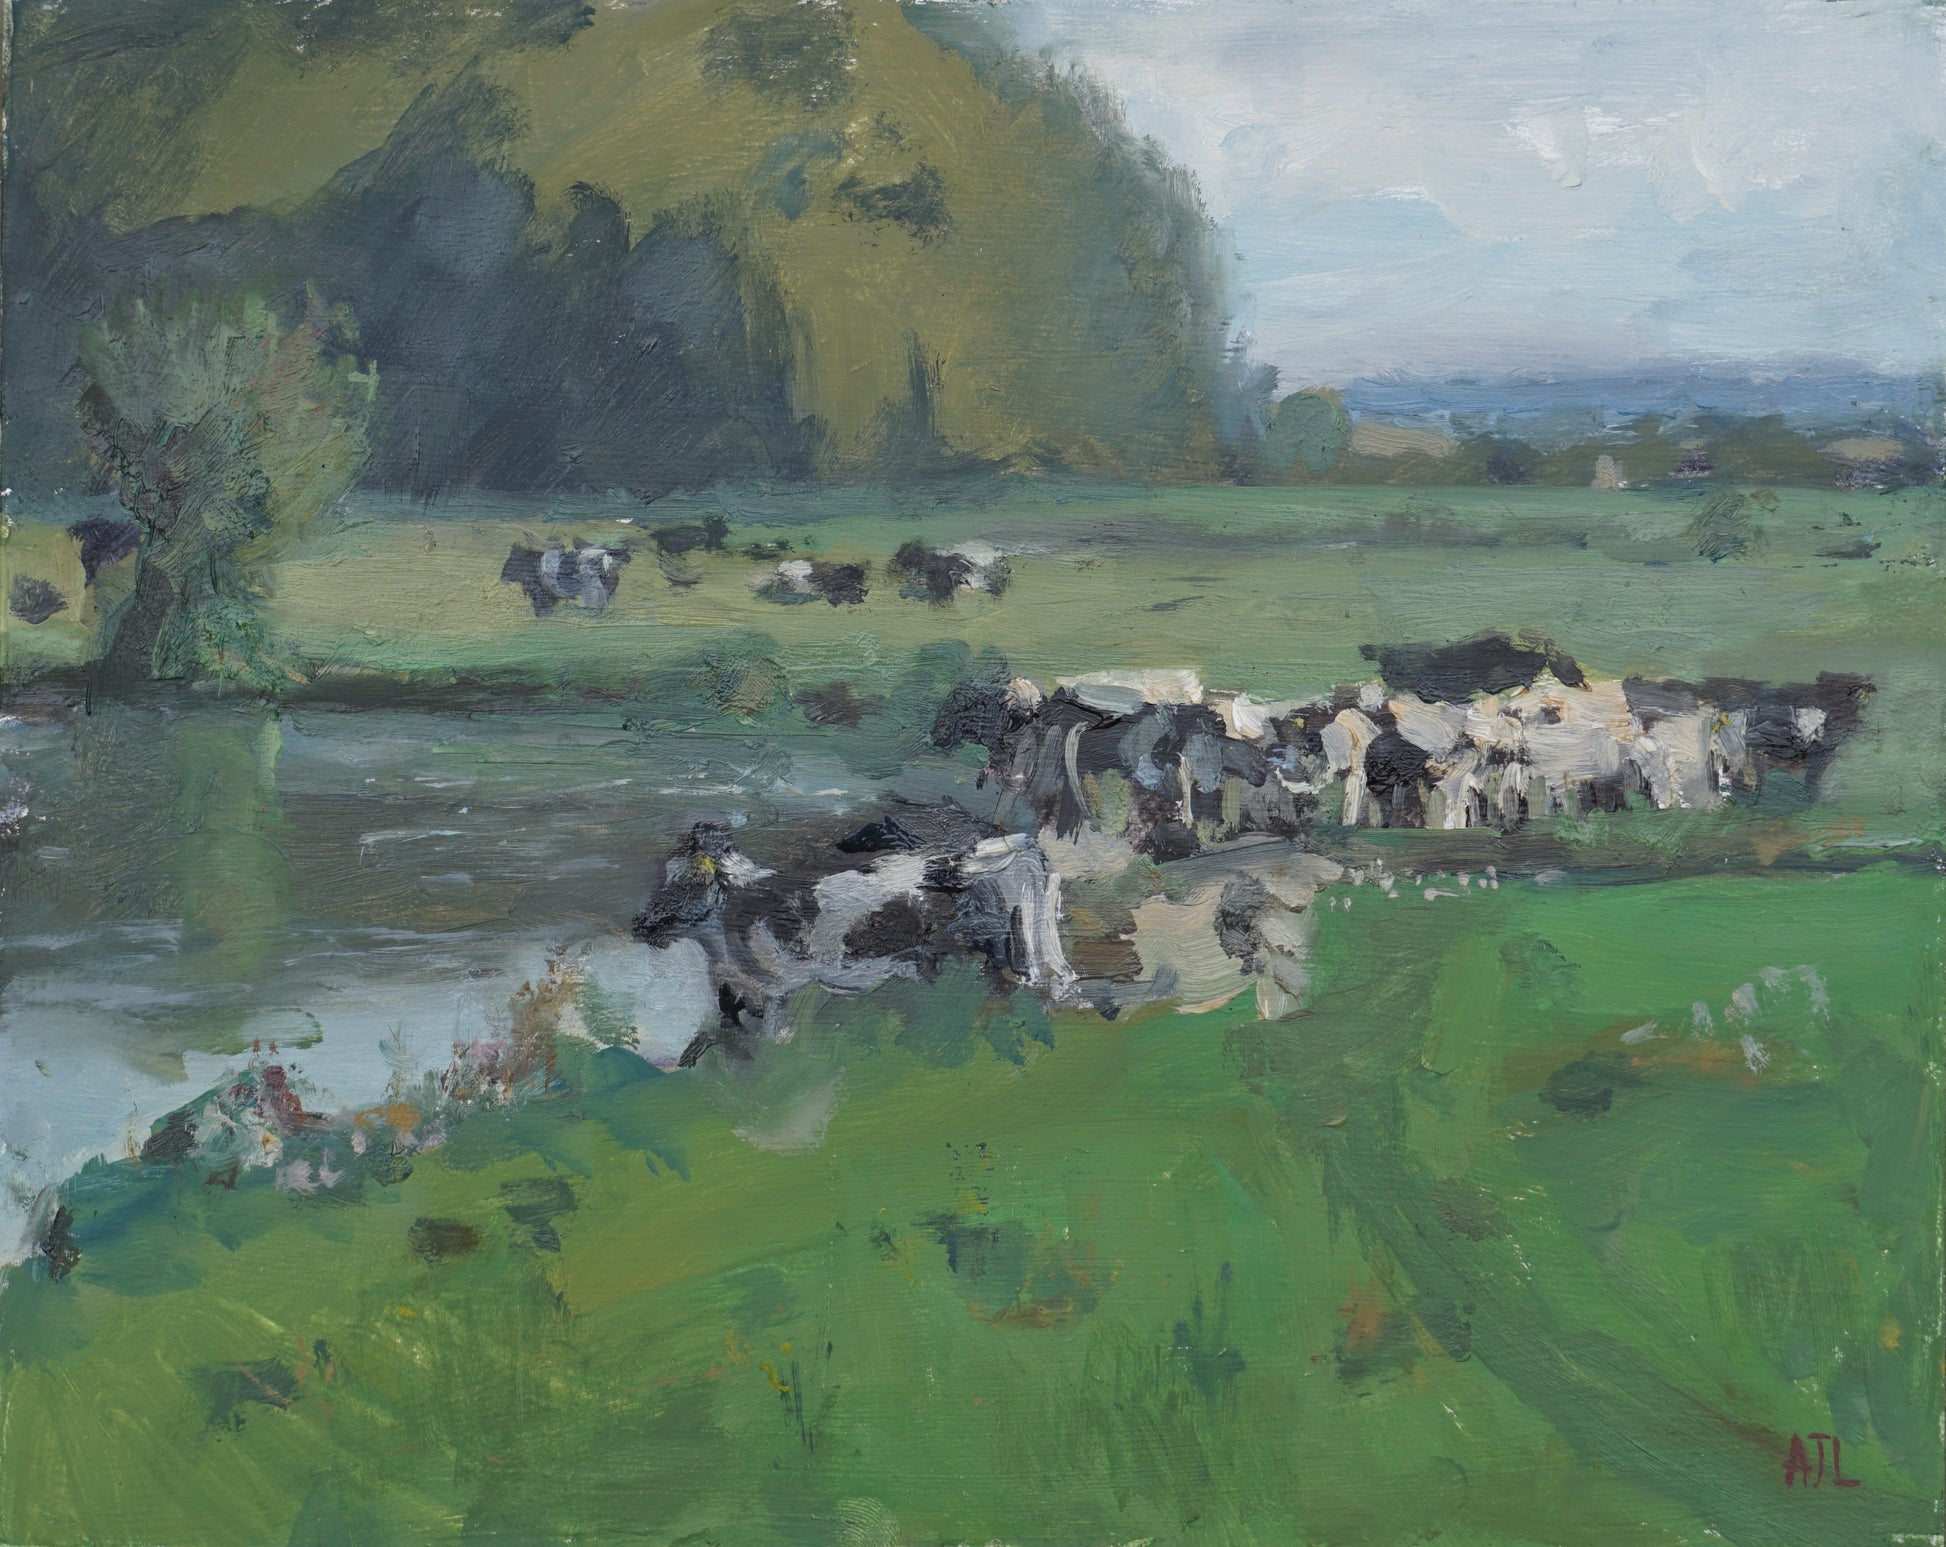 Paining depicting a herd of black and white cows by the river